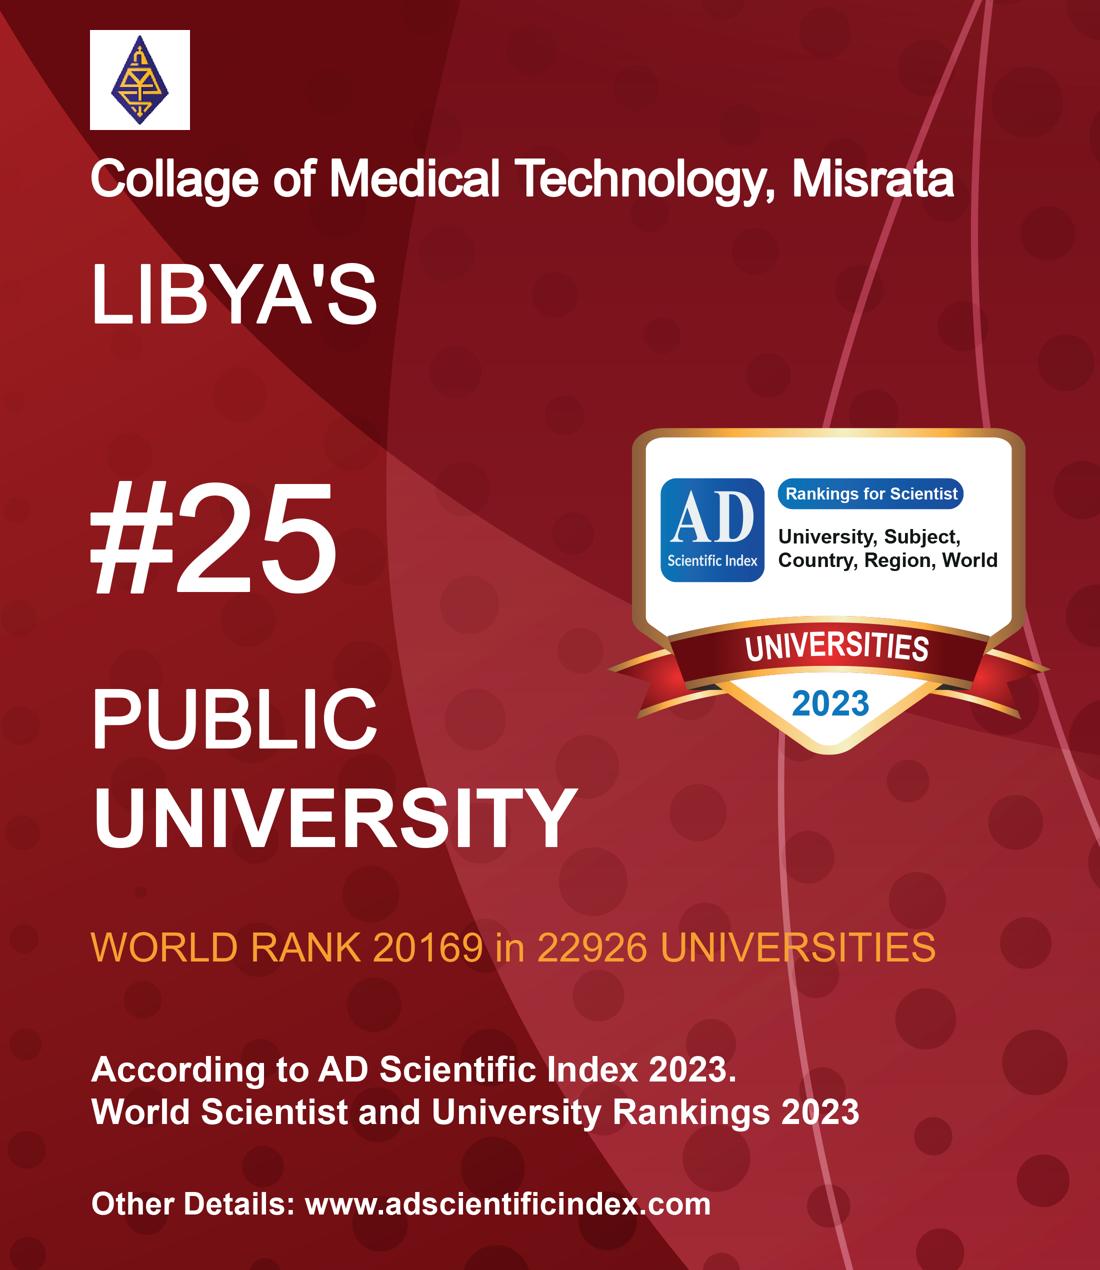 Collage of Medical Technology, Misrata